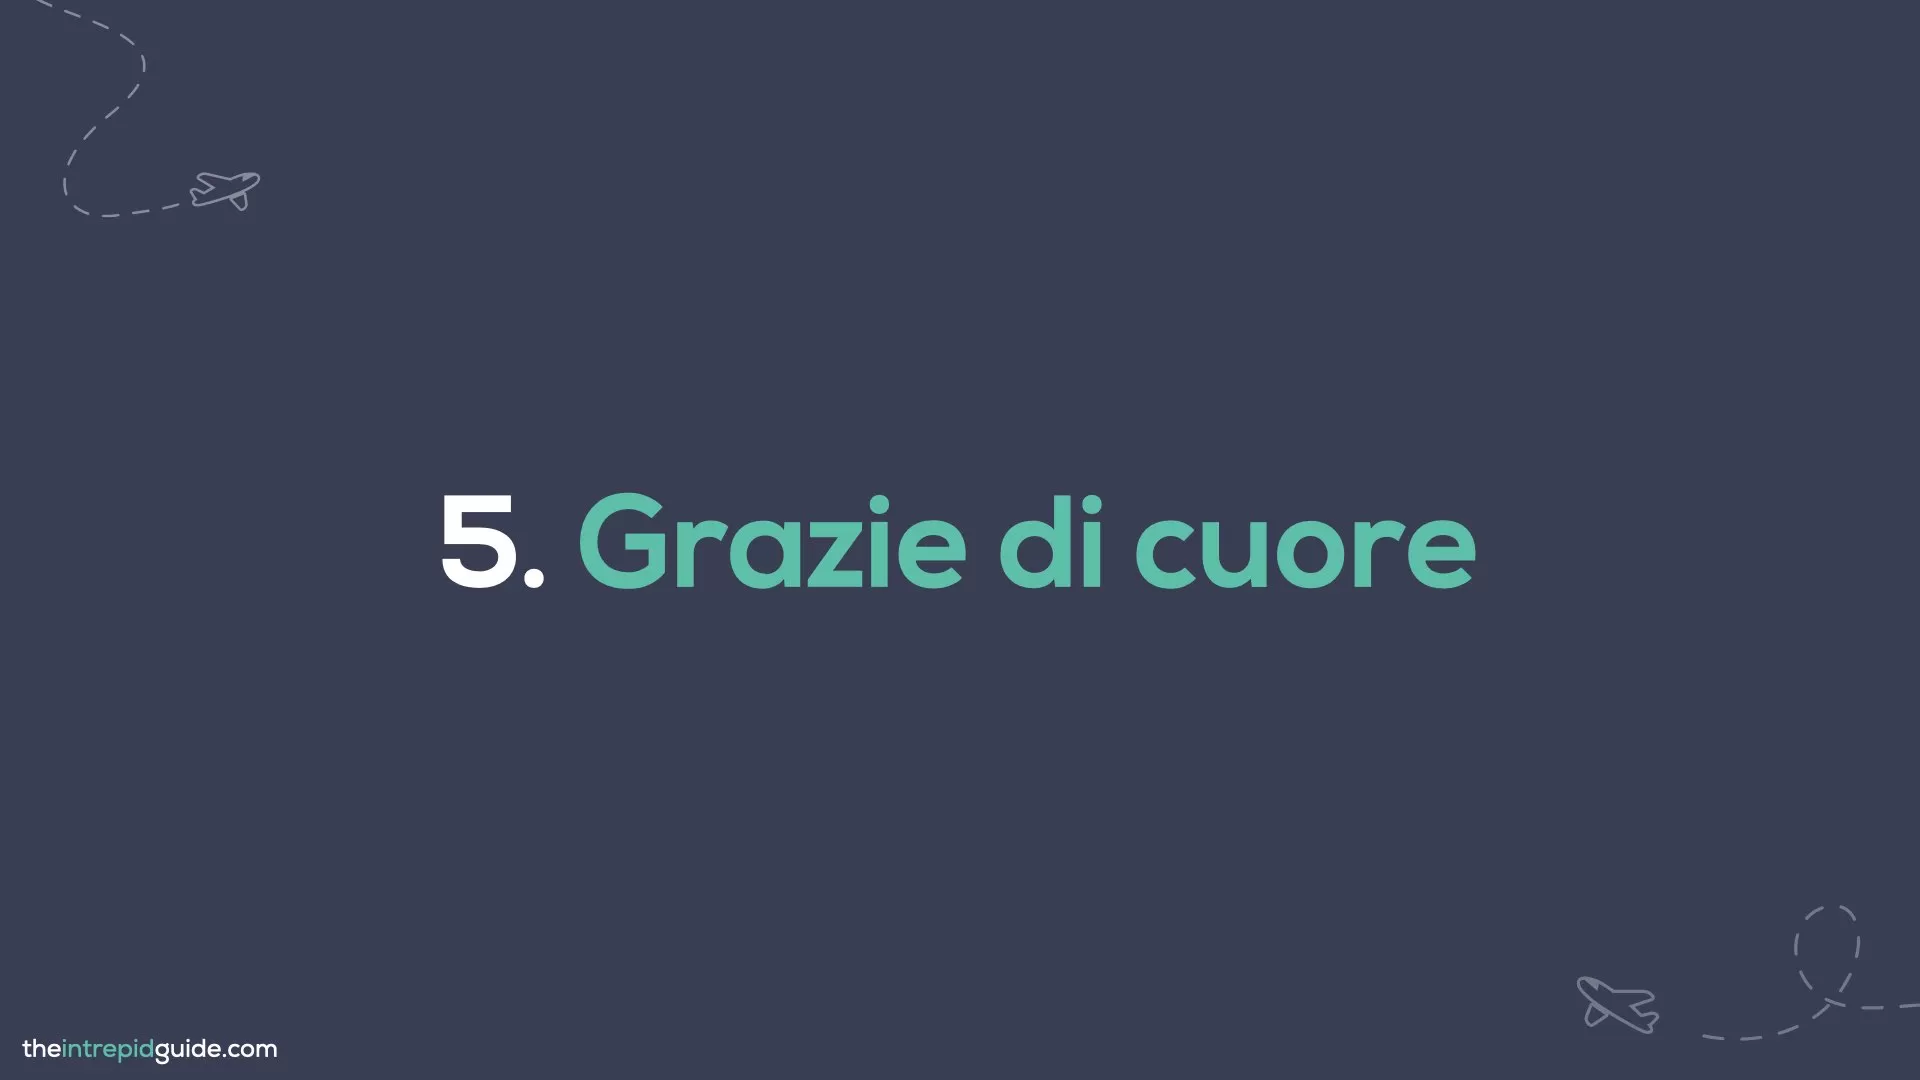 How to say thank you in Italian - Grazie di cuore